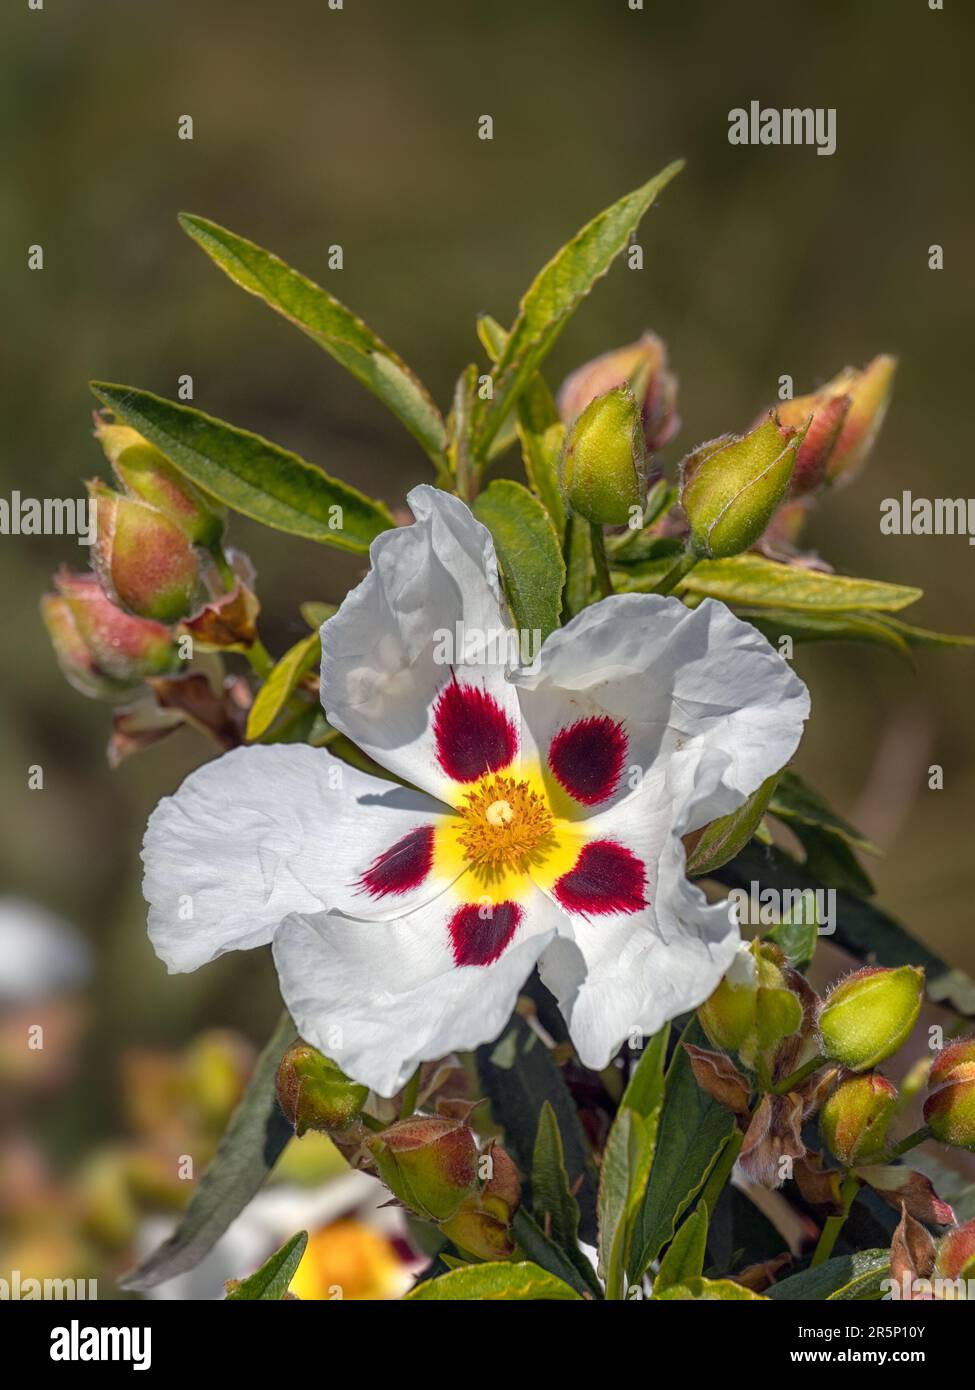 Closeup of flower and buds of Cistus × aguilarii 'Maculatus' in a garden in early summer Stock Photo